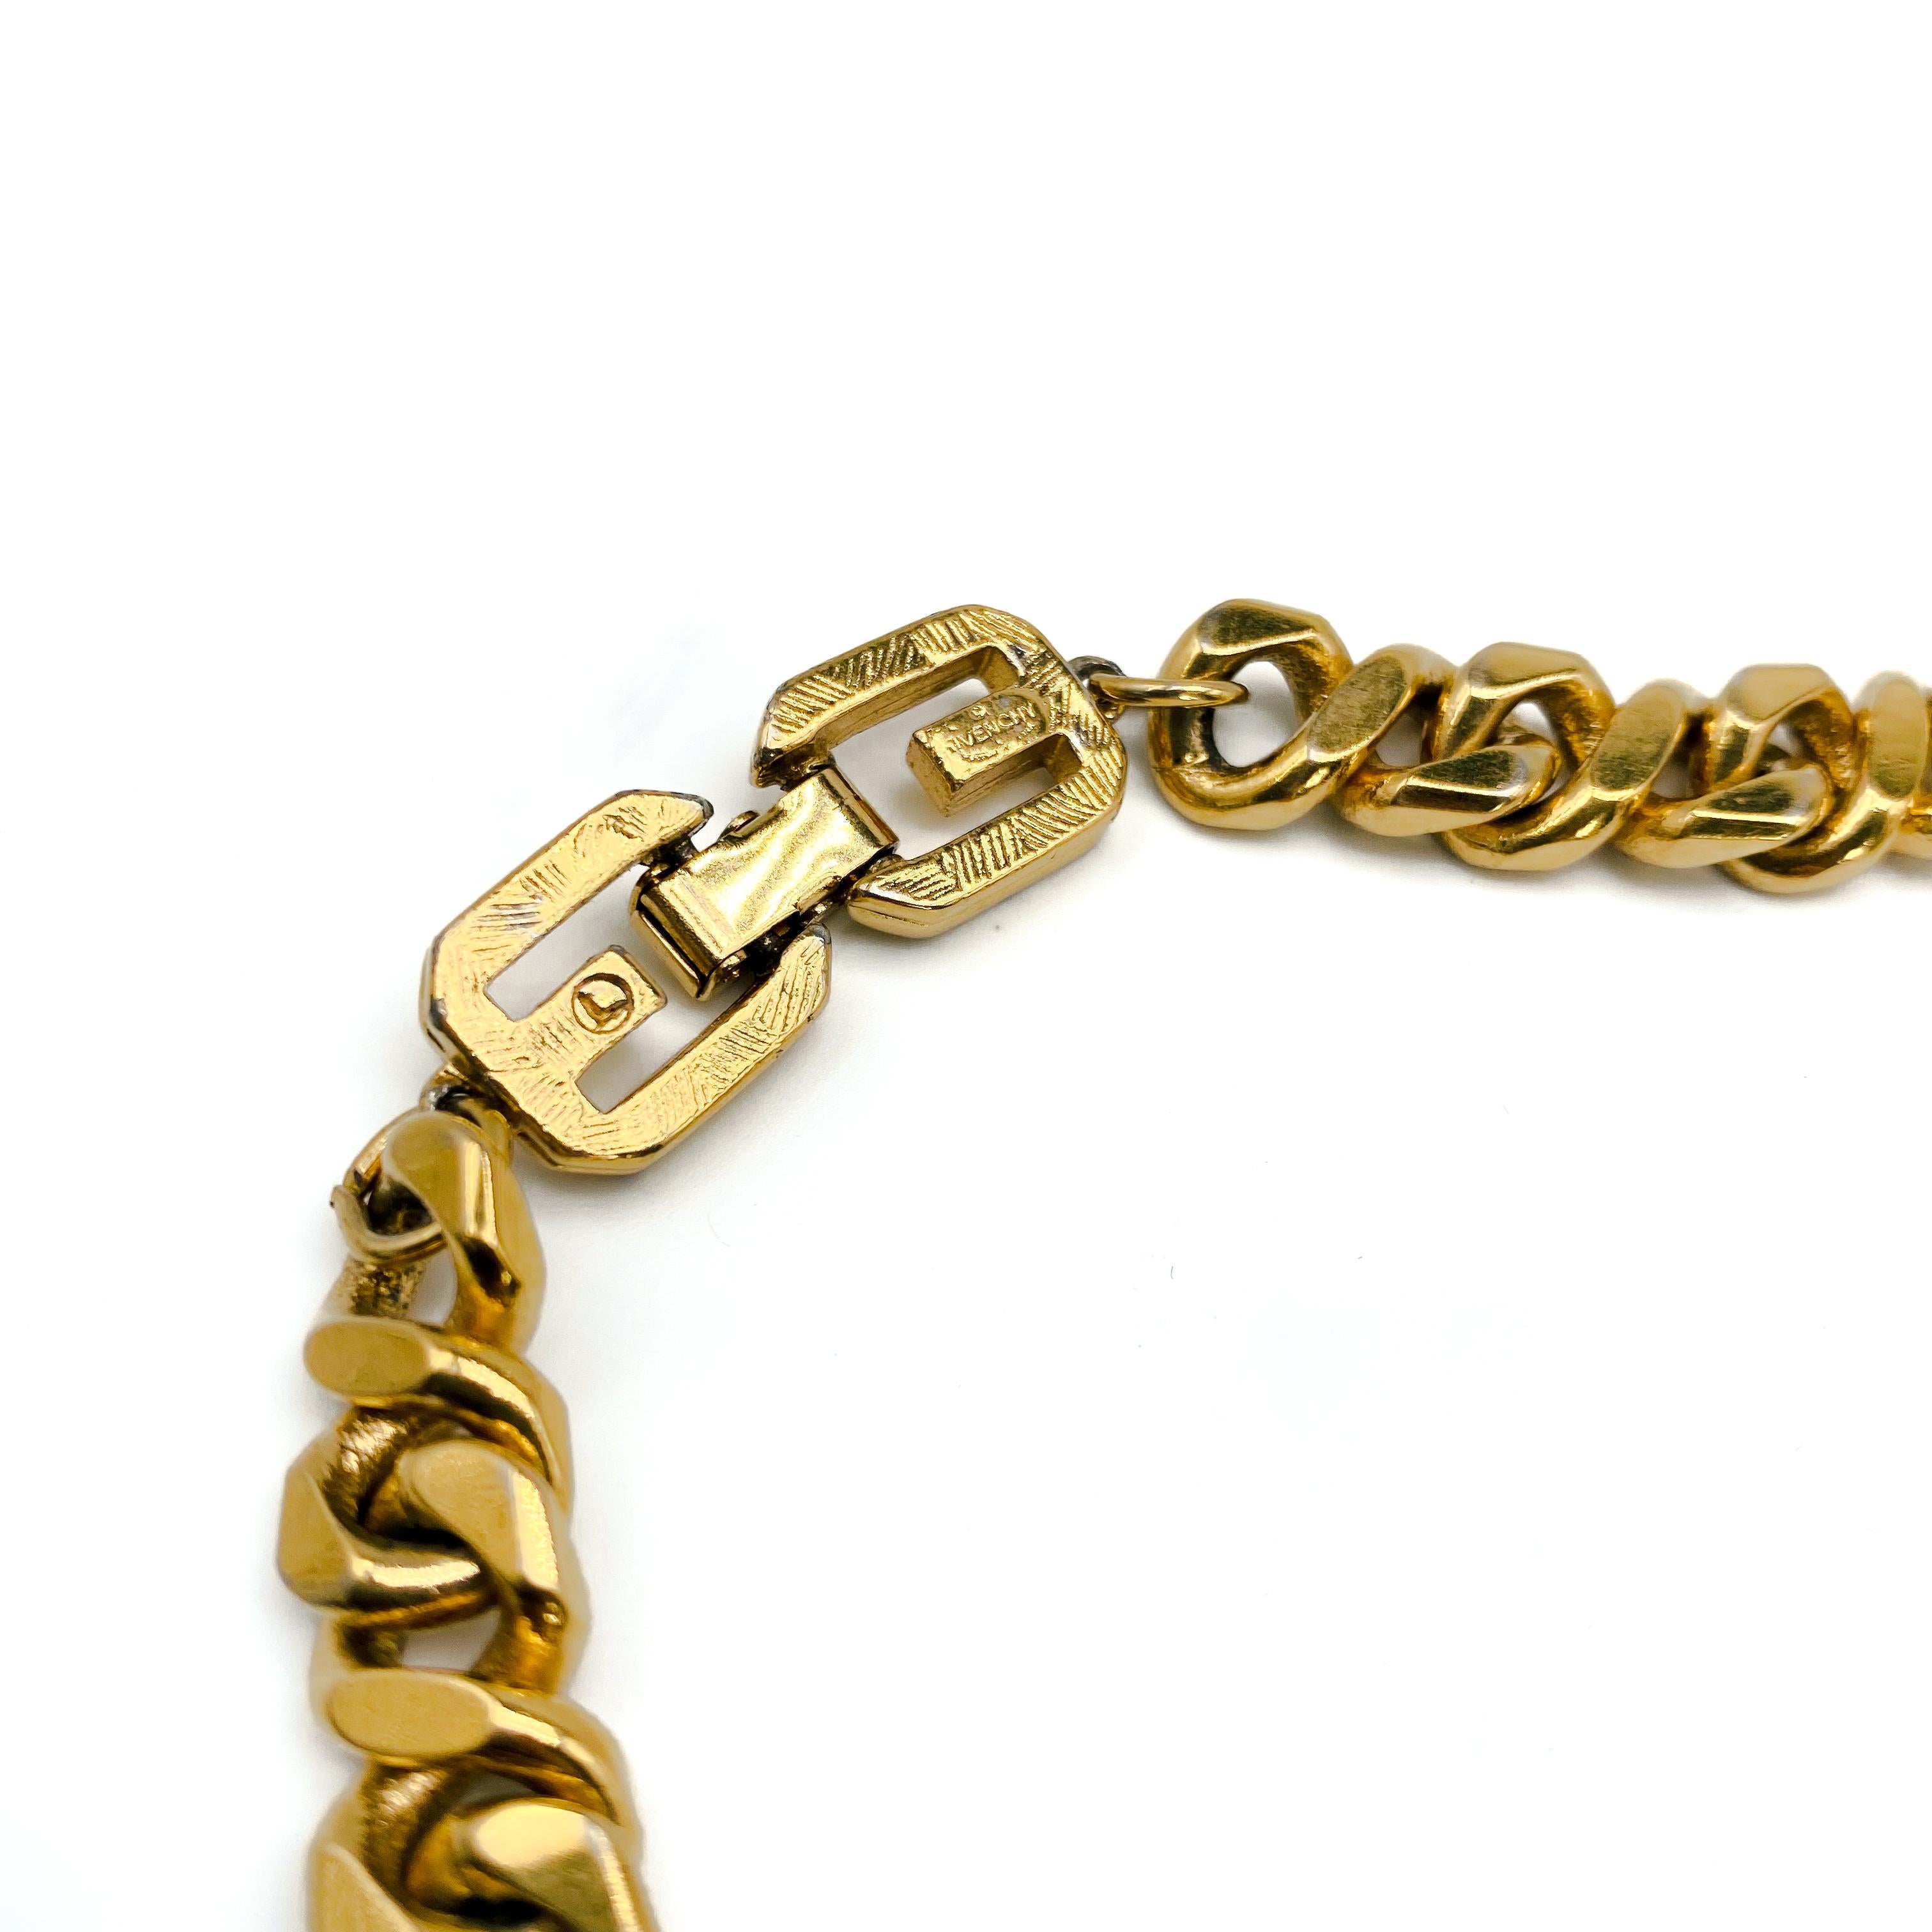 1980s gold chains